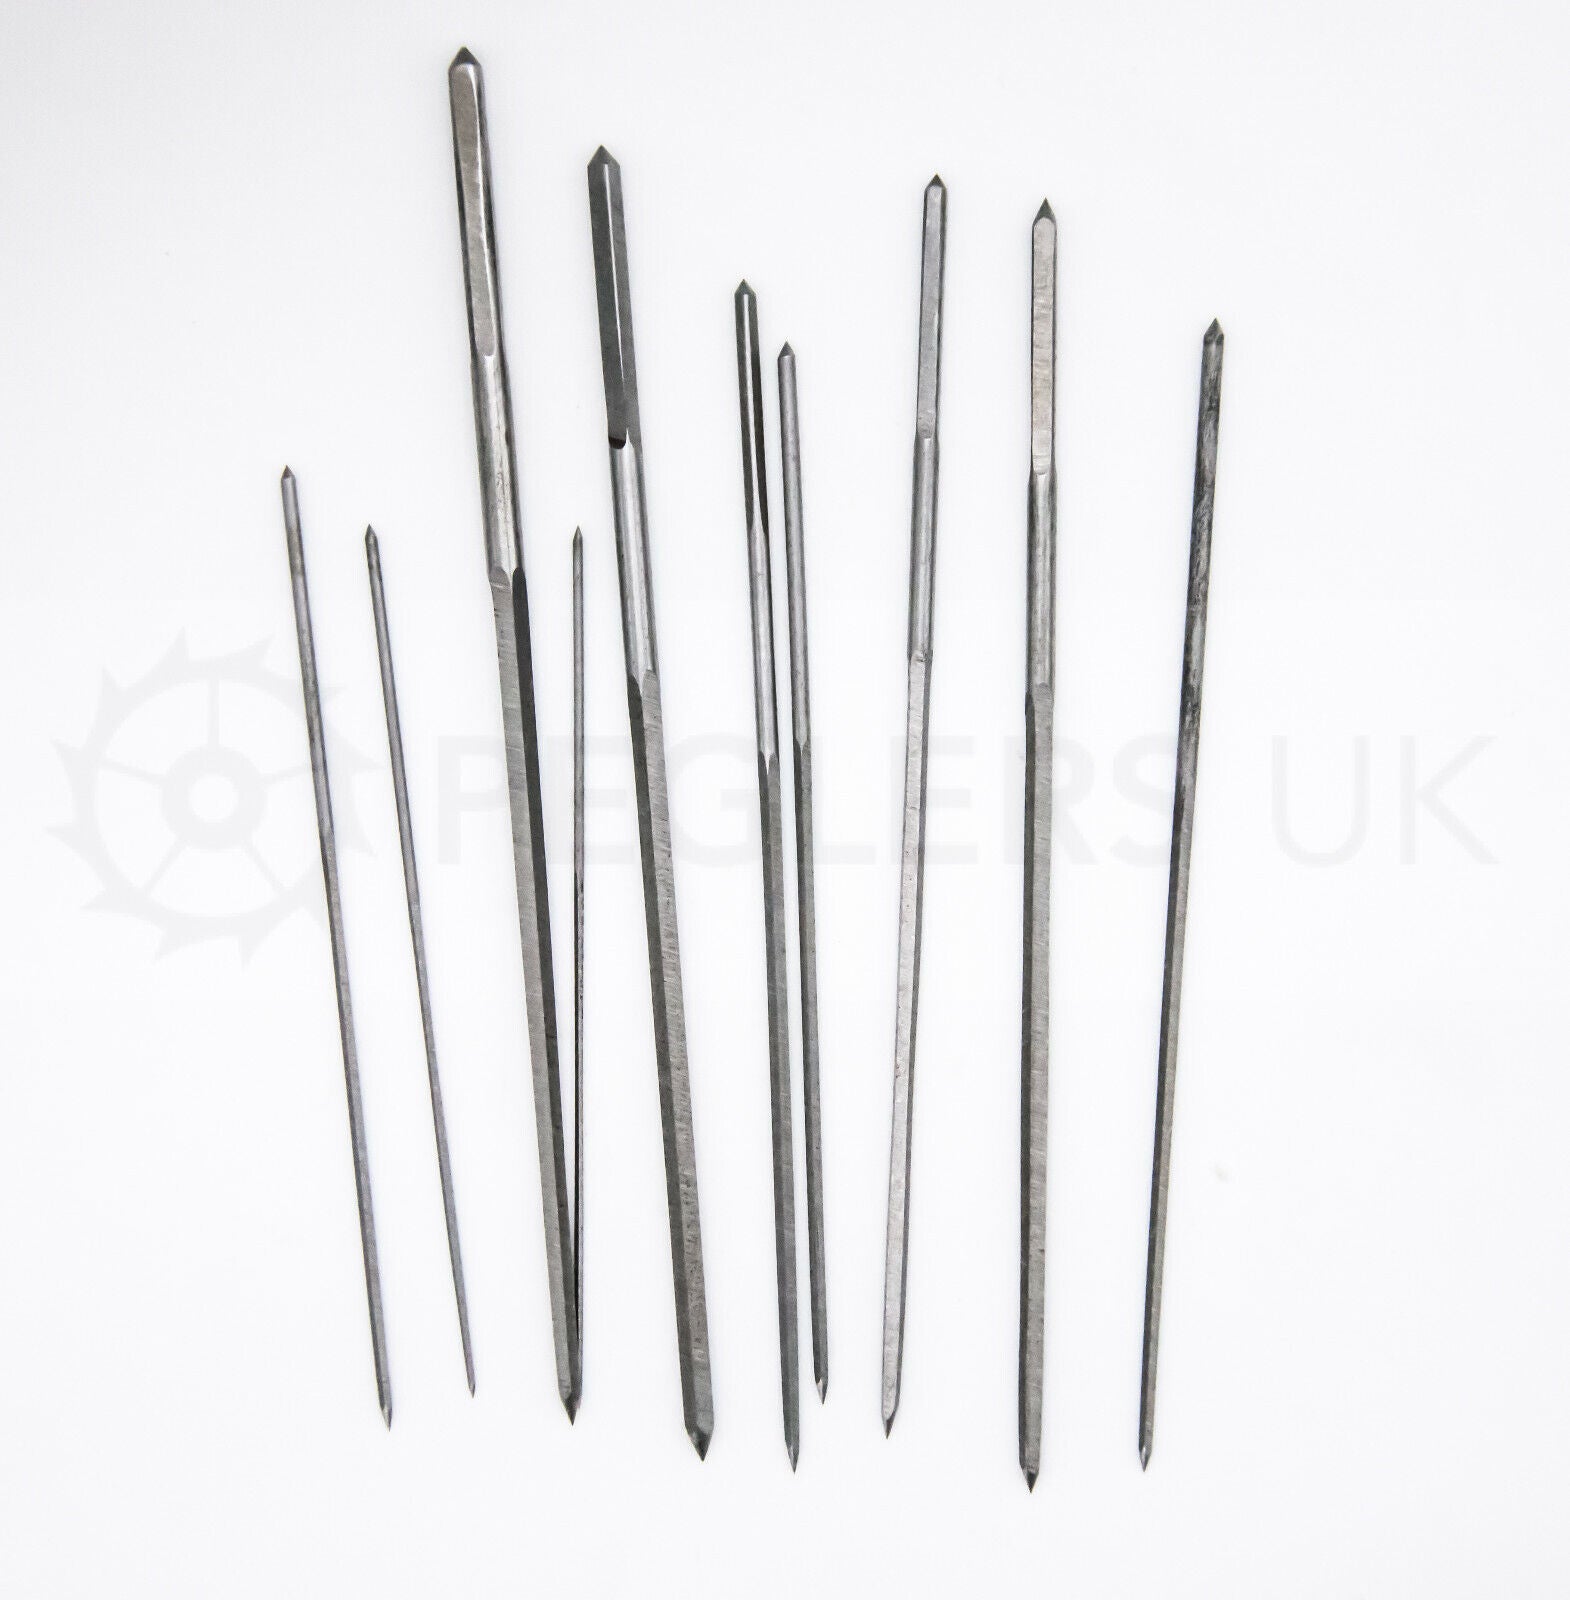 Set of 10x Cutting Broaches 0.9 - 4mm